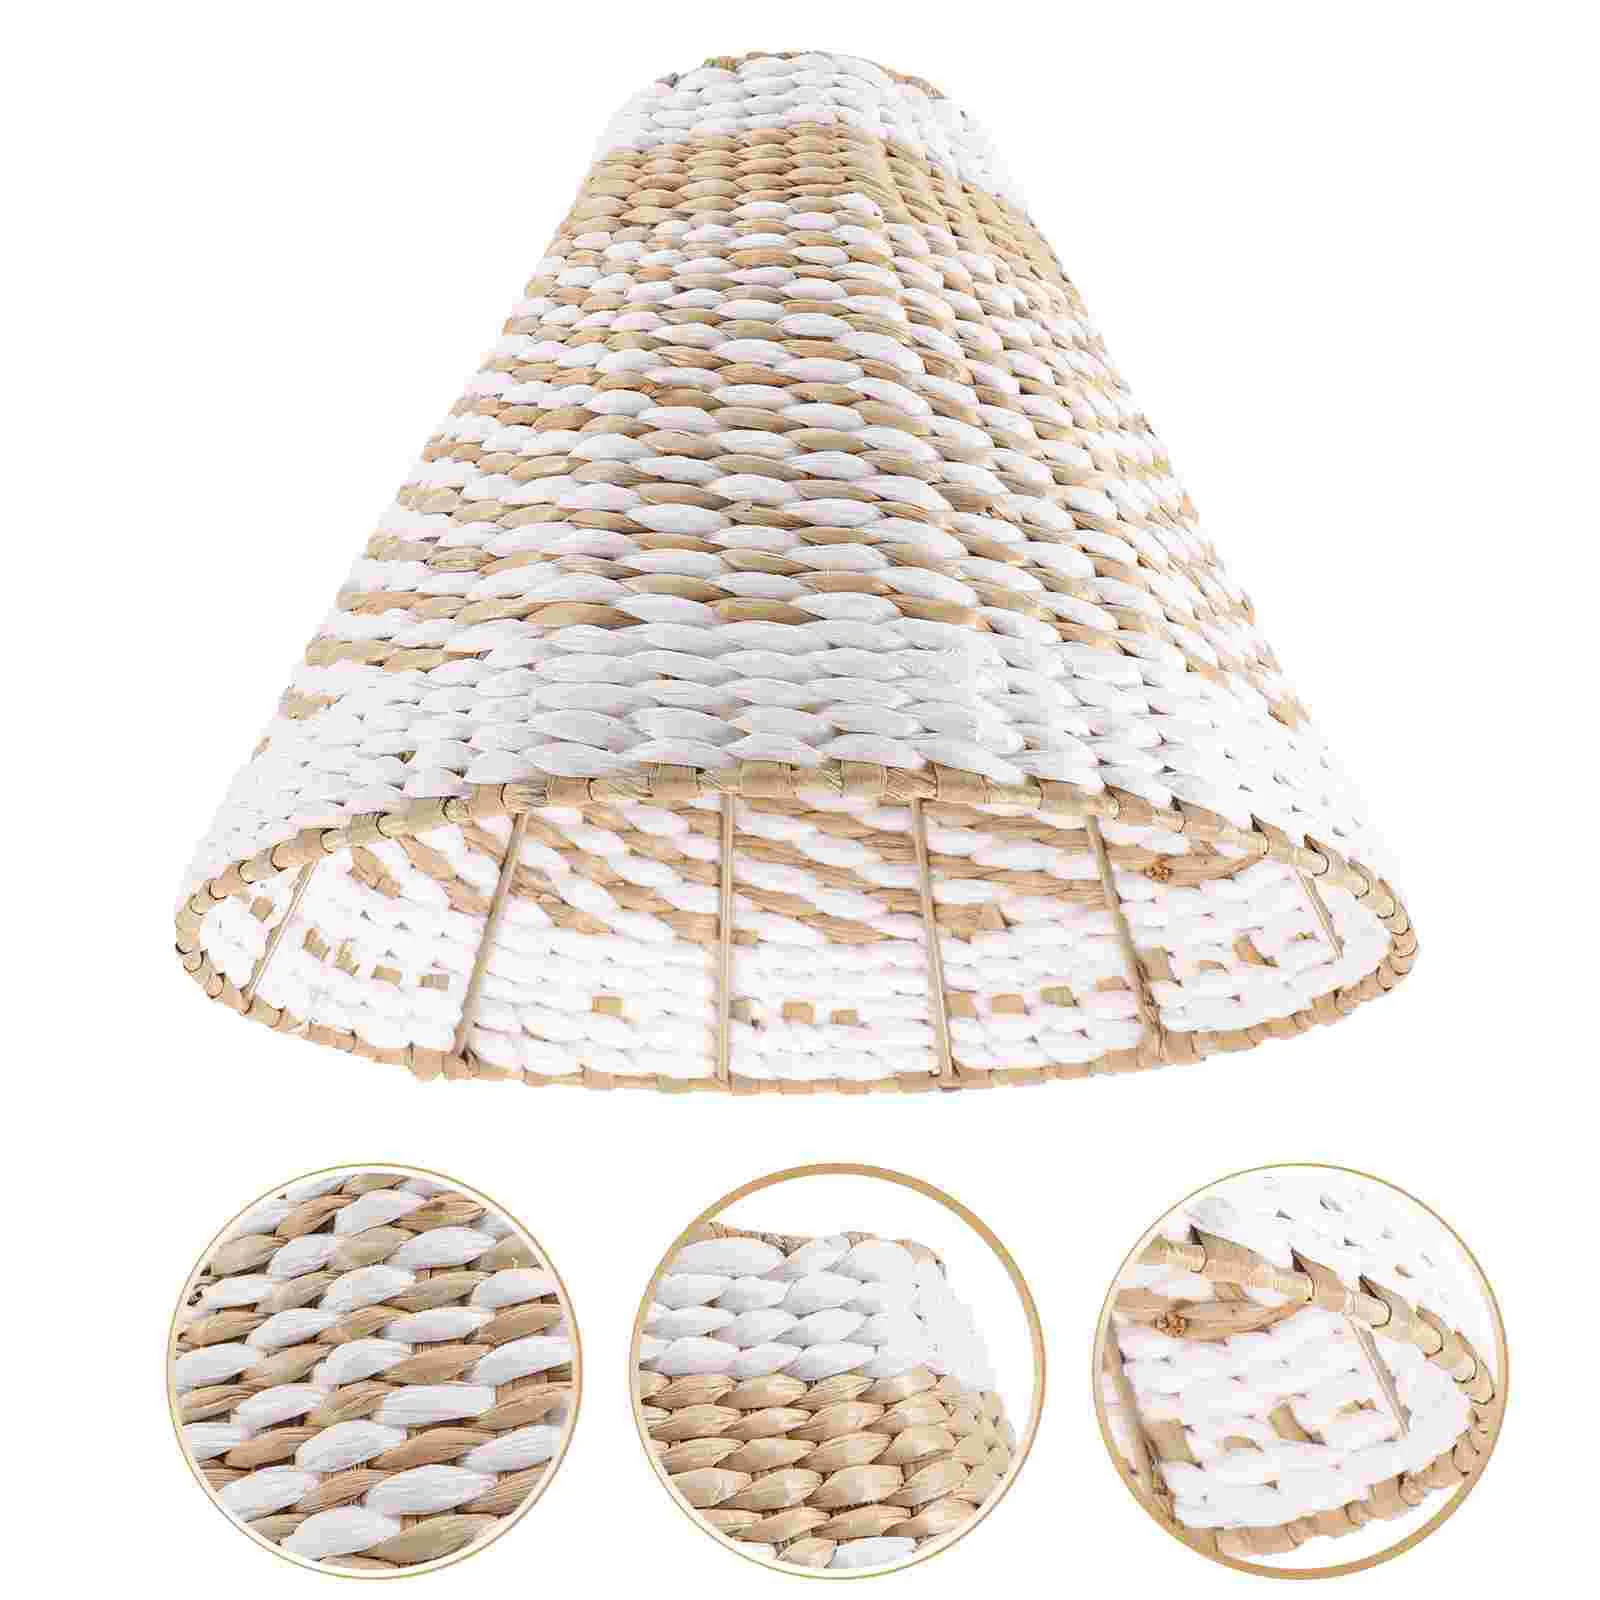 Lamp Lampshade Shade Cover Shades Light Paper Pendantvintage Woven Lamps Replacement Ceiling Hanging Wall Lampshades Table